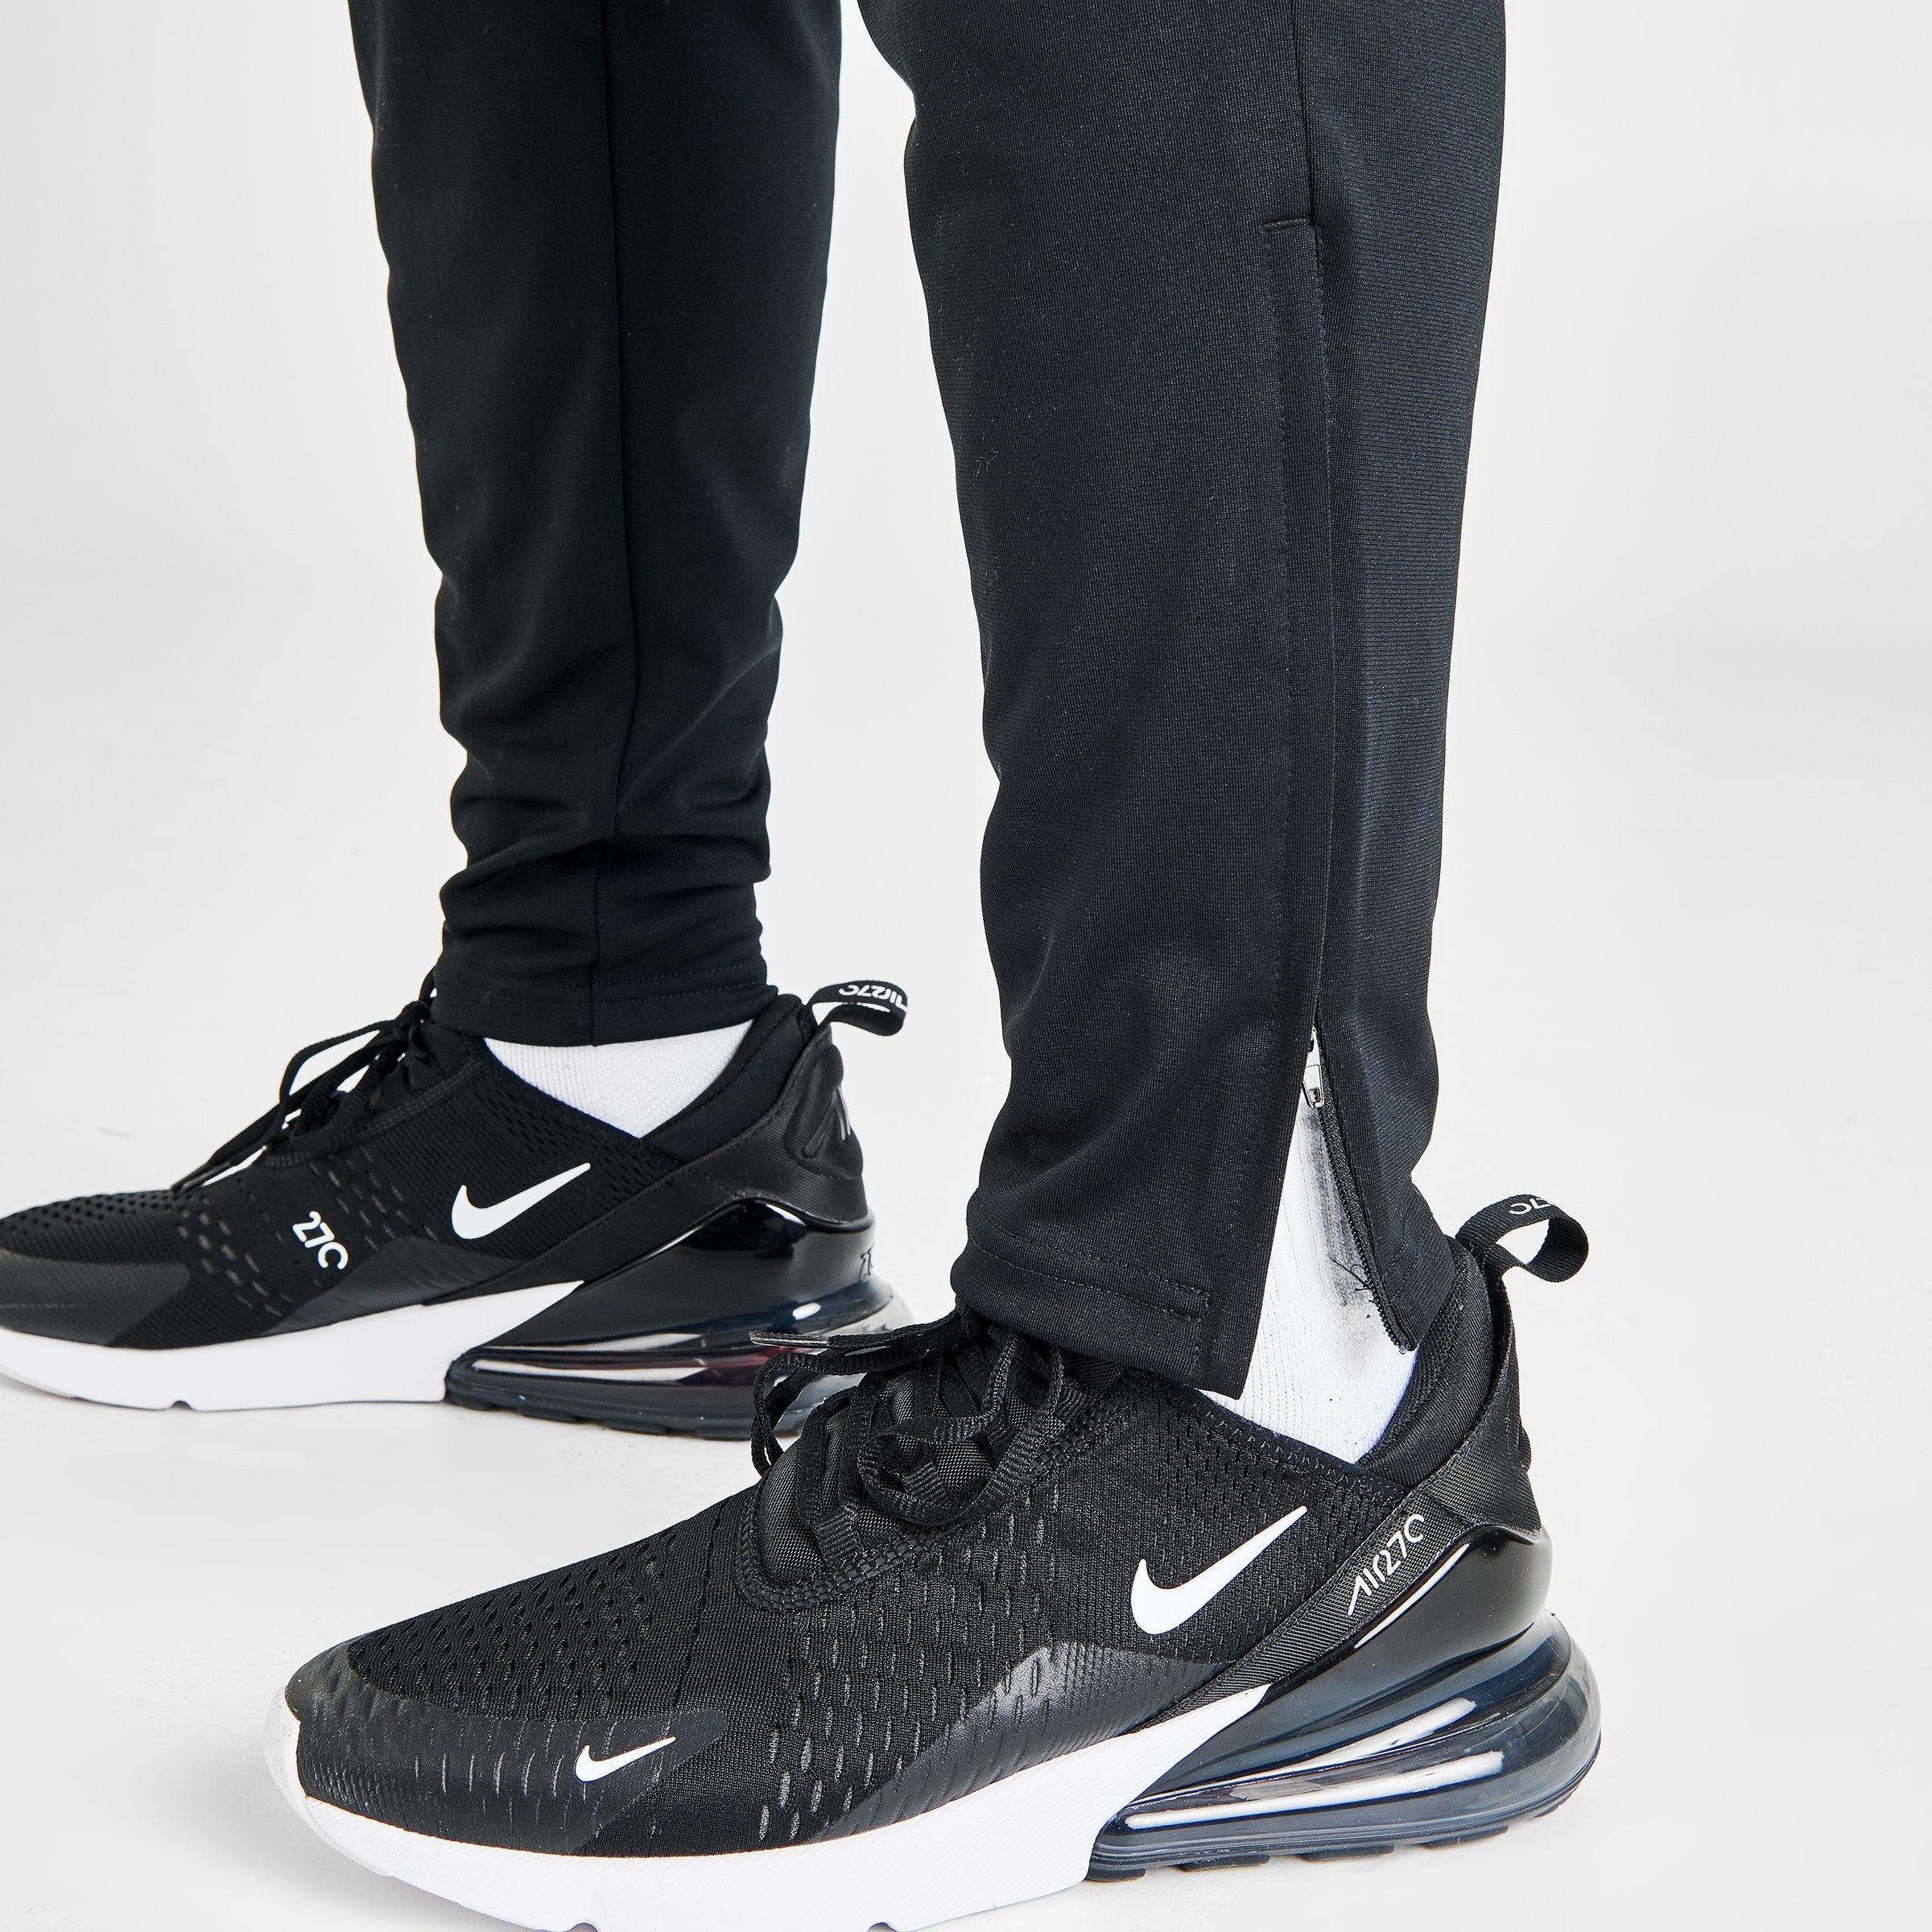 nike dri fit pants with zipper ankle